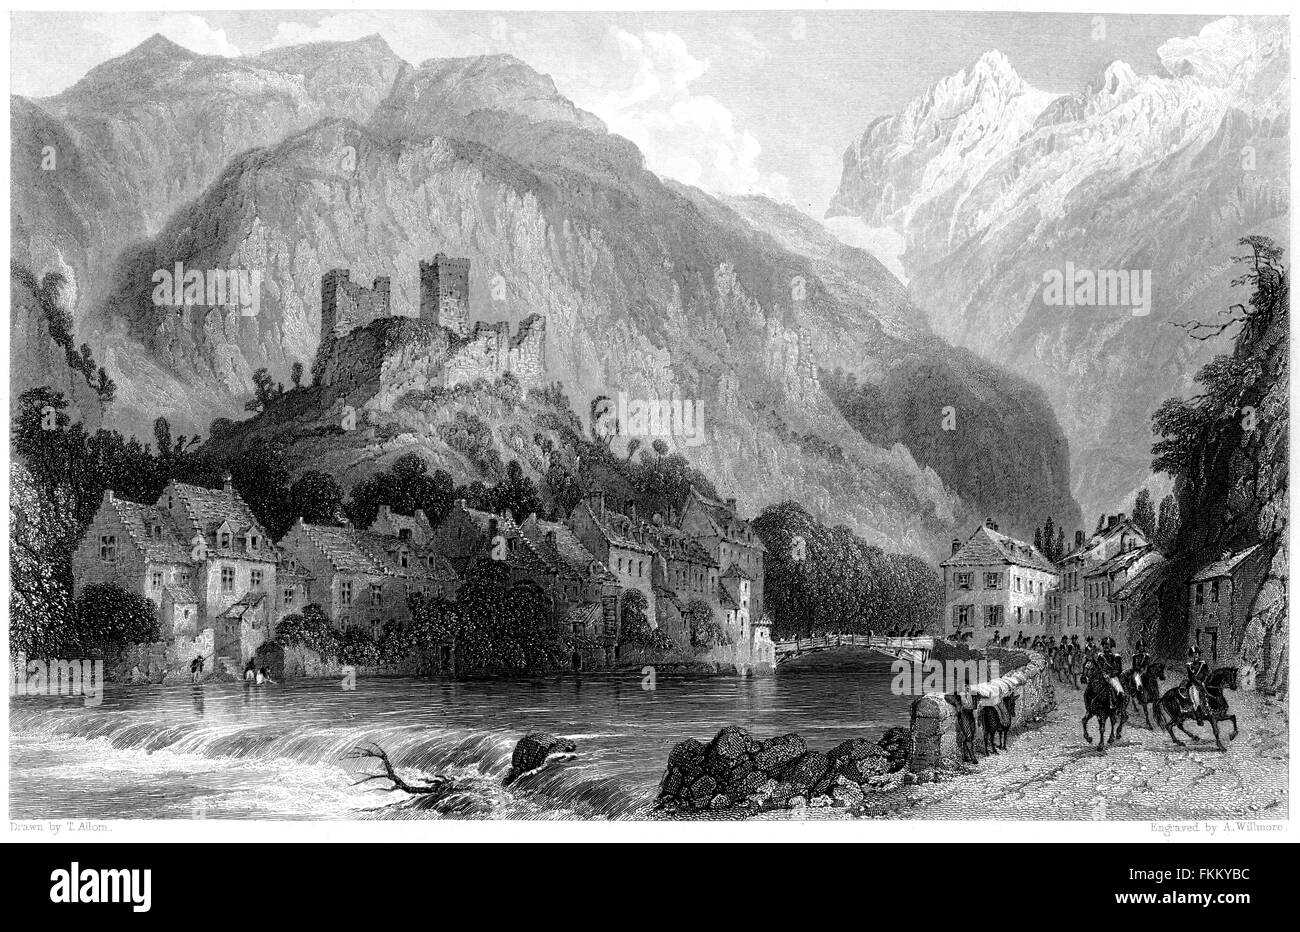 An engraving of Saint Beat, Upper Garenne (Haut Garonne) scanned at high resolution from a book printed in 1876. Stock Photo